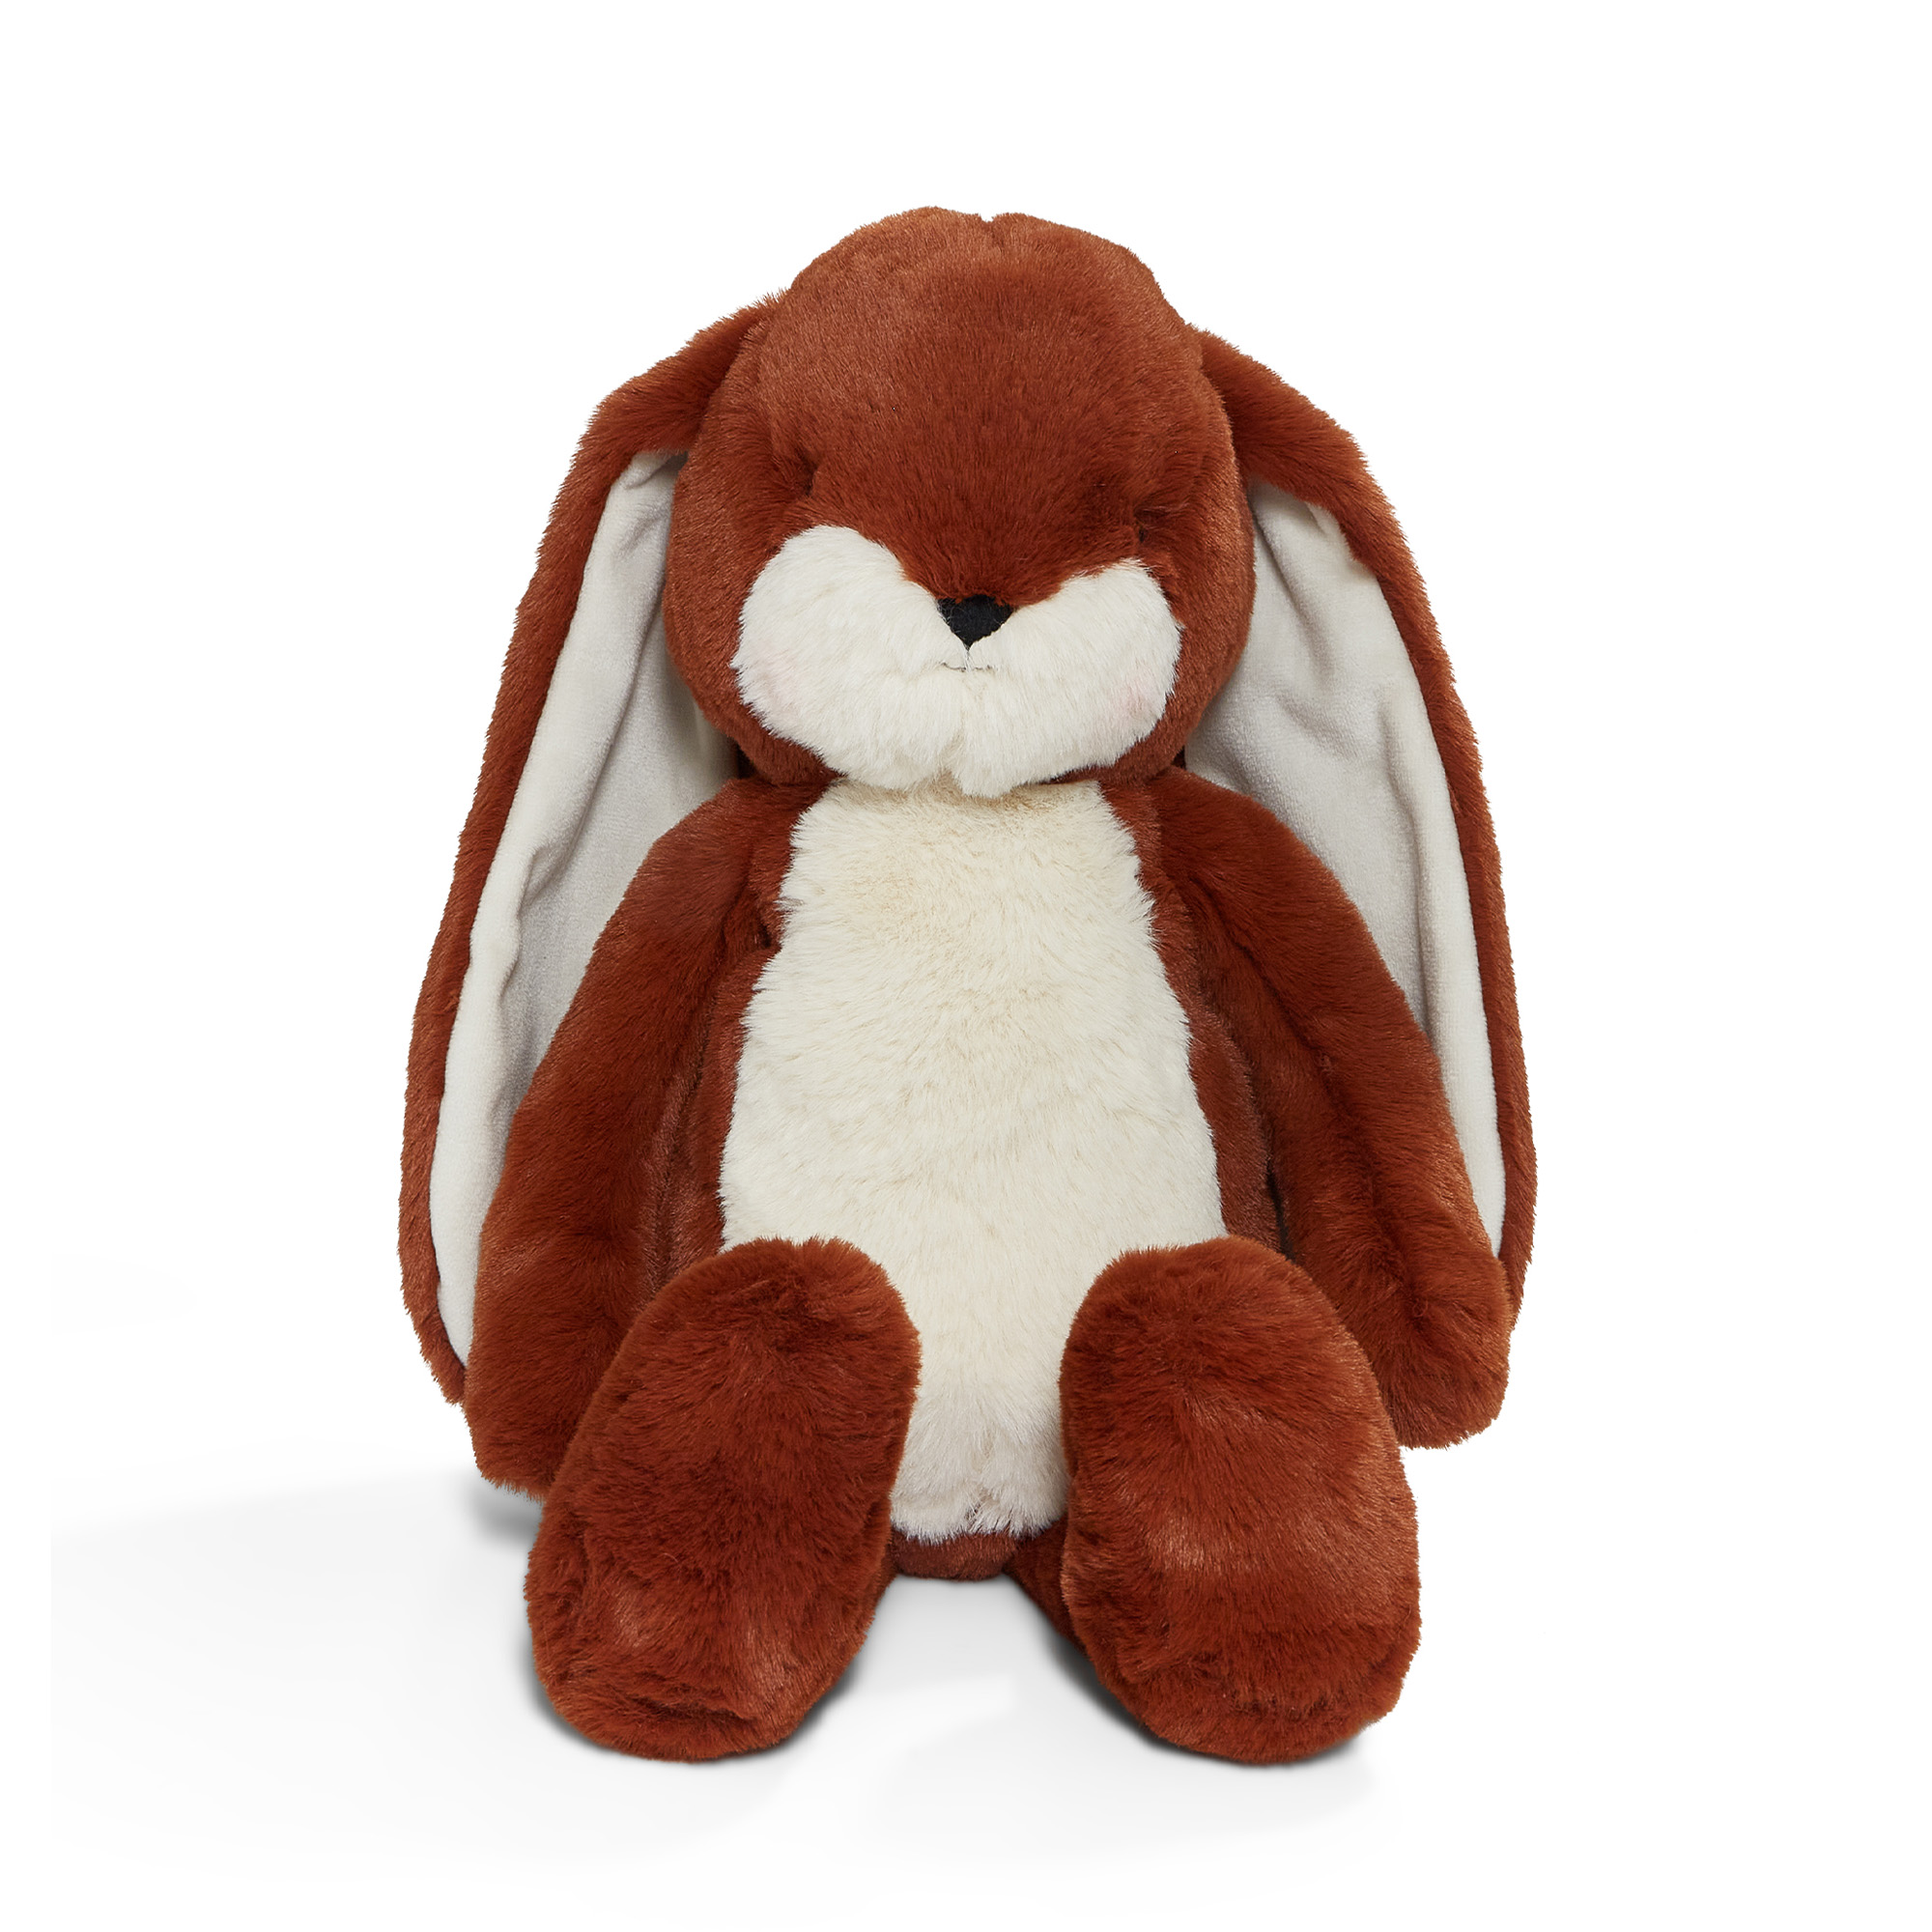 Peluche sweet nibble paprika 40cm - Bunnies By The Bay